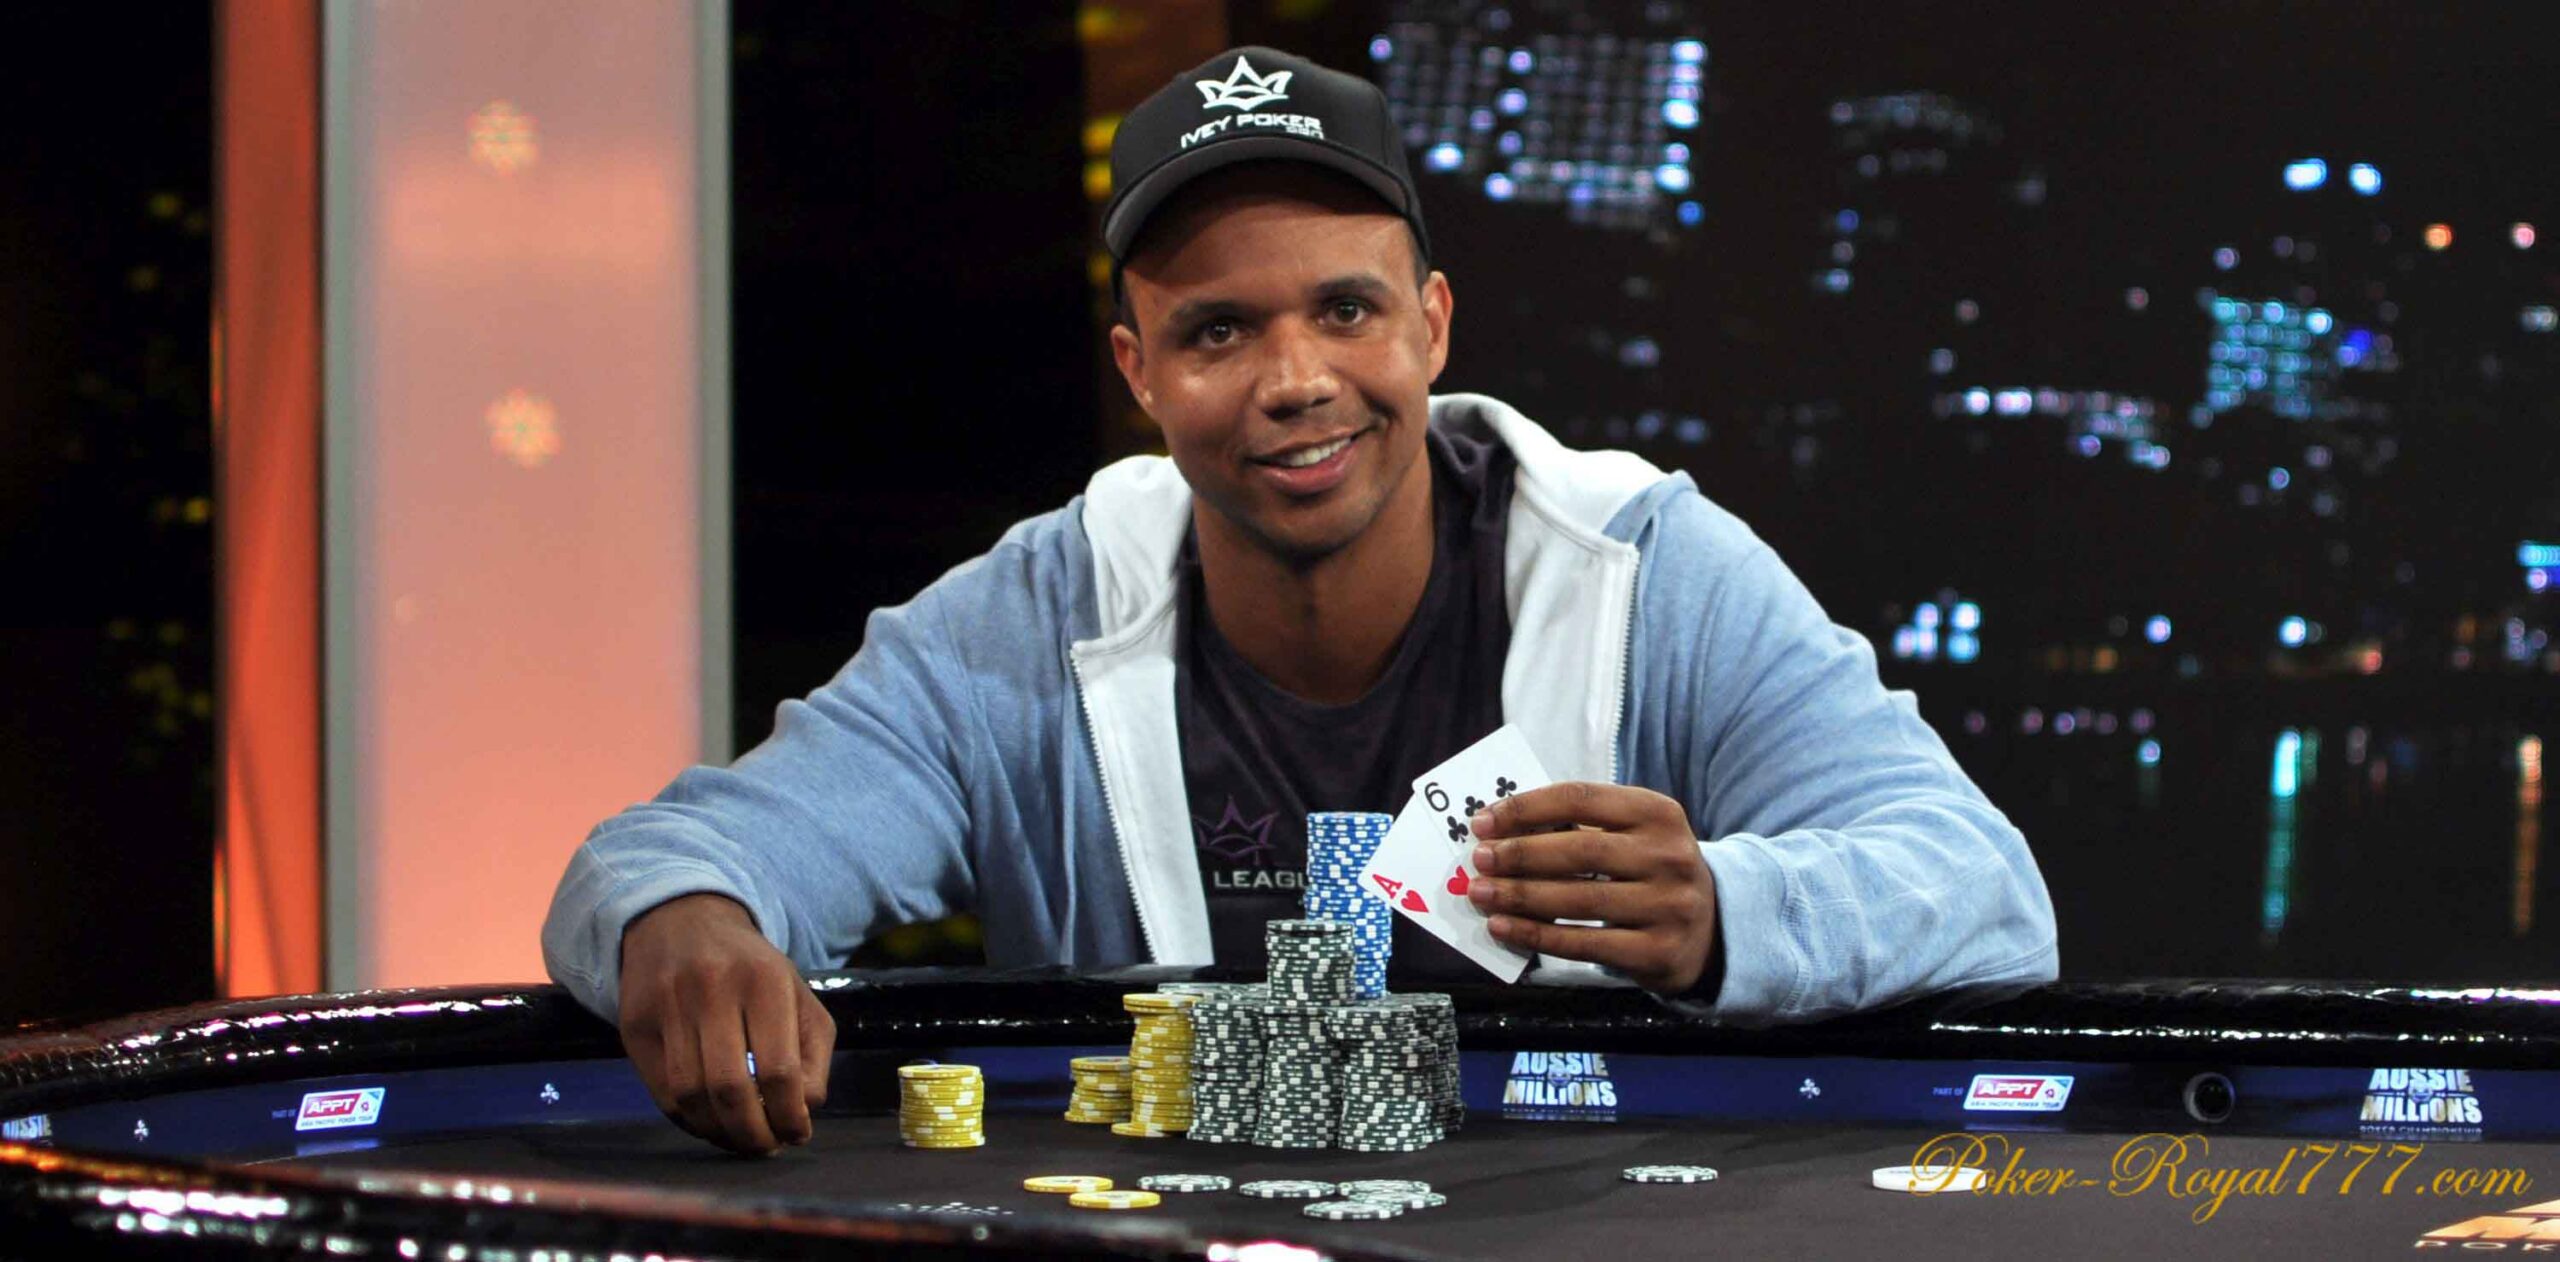 Phil Ivey: interesting facts from the biography